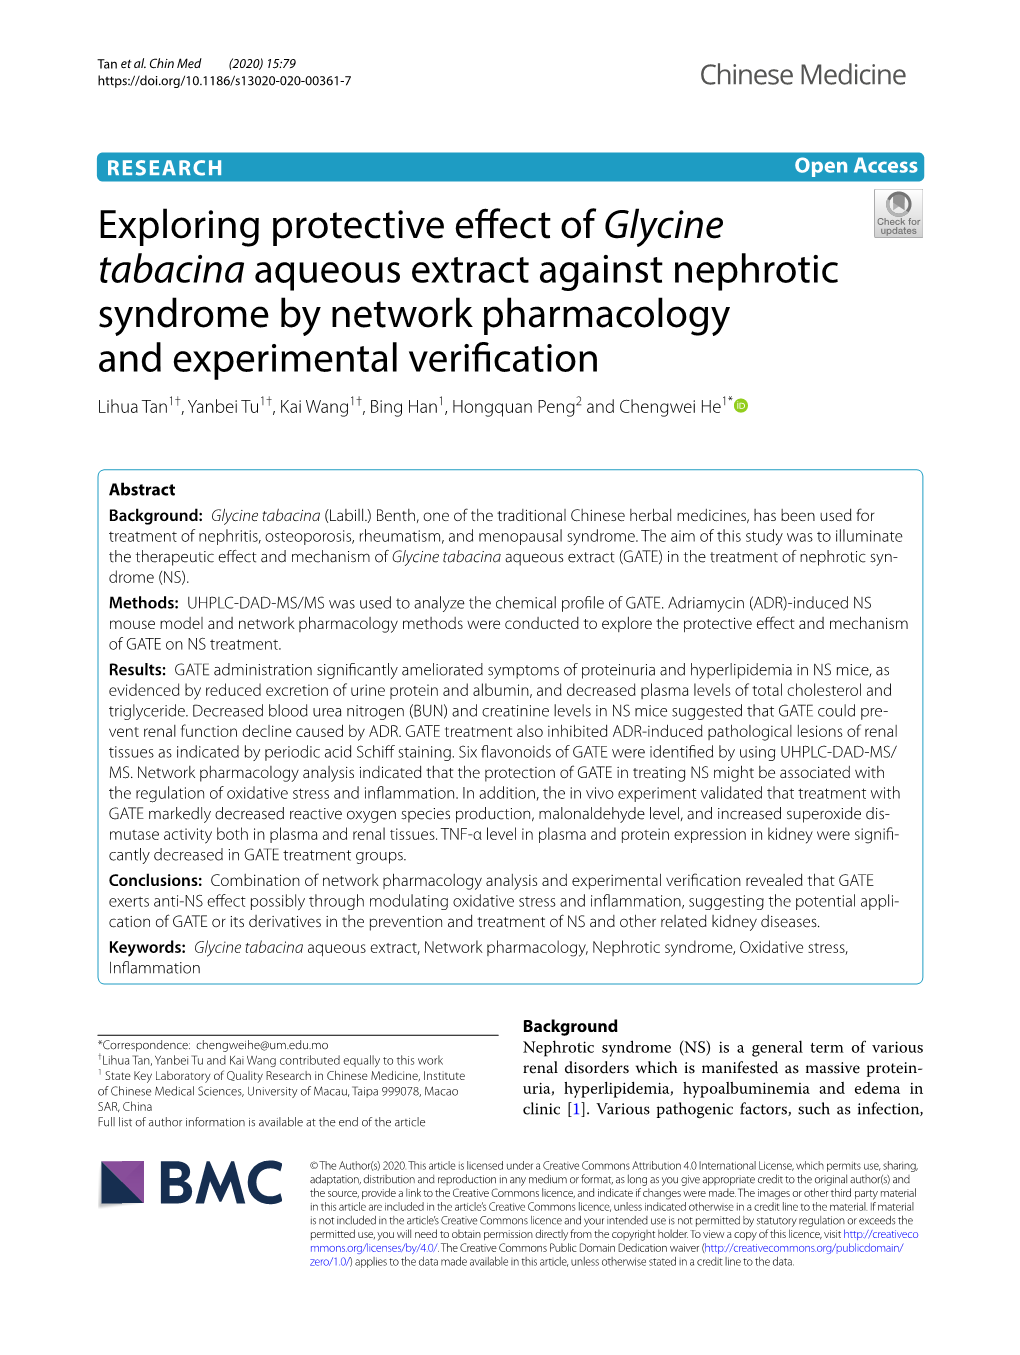 Exploring Protective Effect of Glycine Tabacina Aqueous Extract Against Nephrotic Syndrome by Network Pharmacology and Experimen